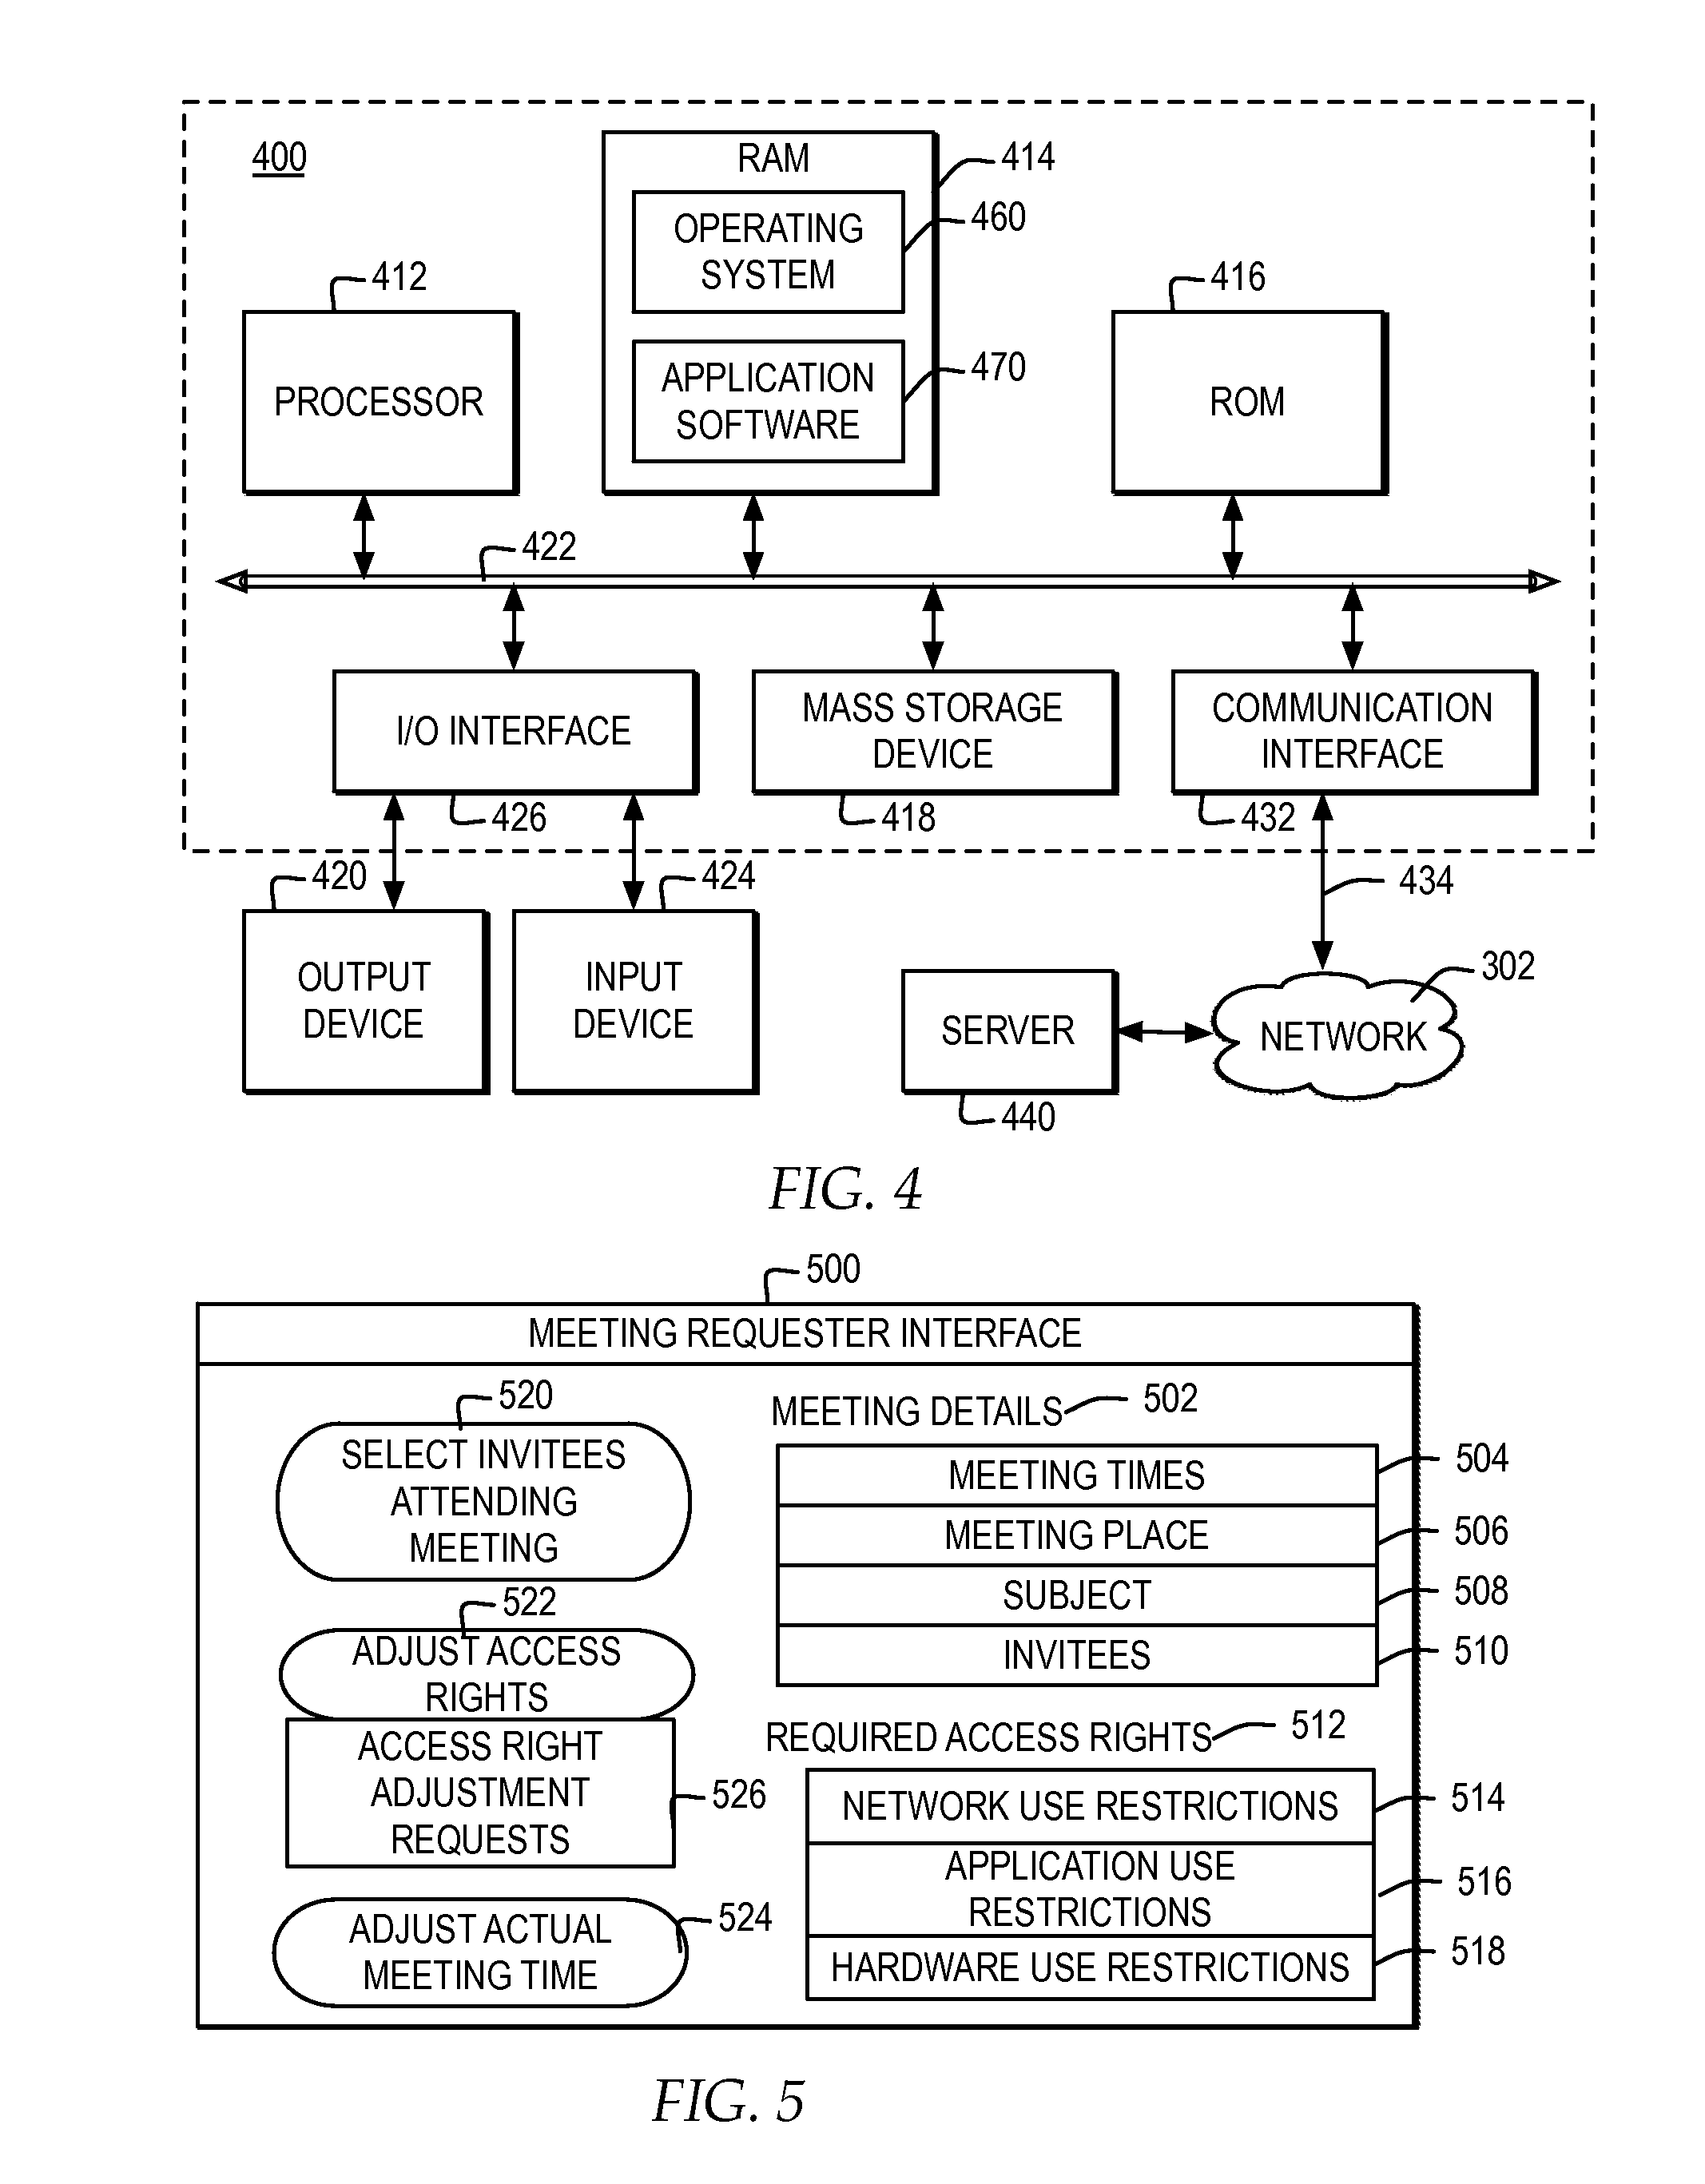 Providing controlled access to the use of electronic devices